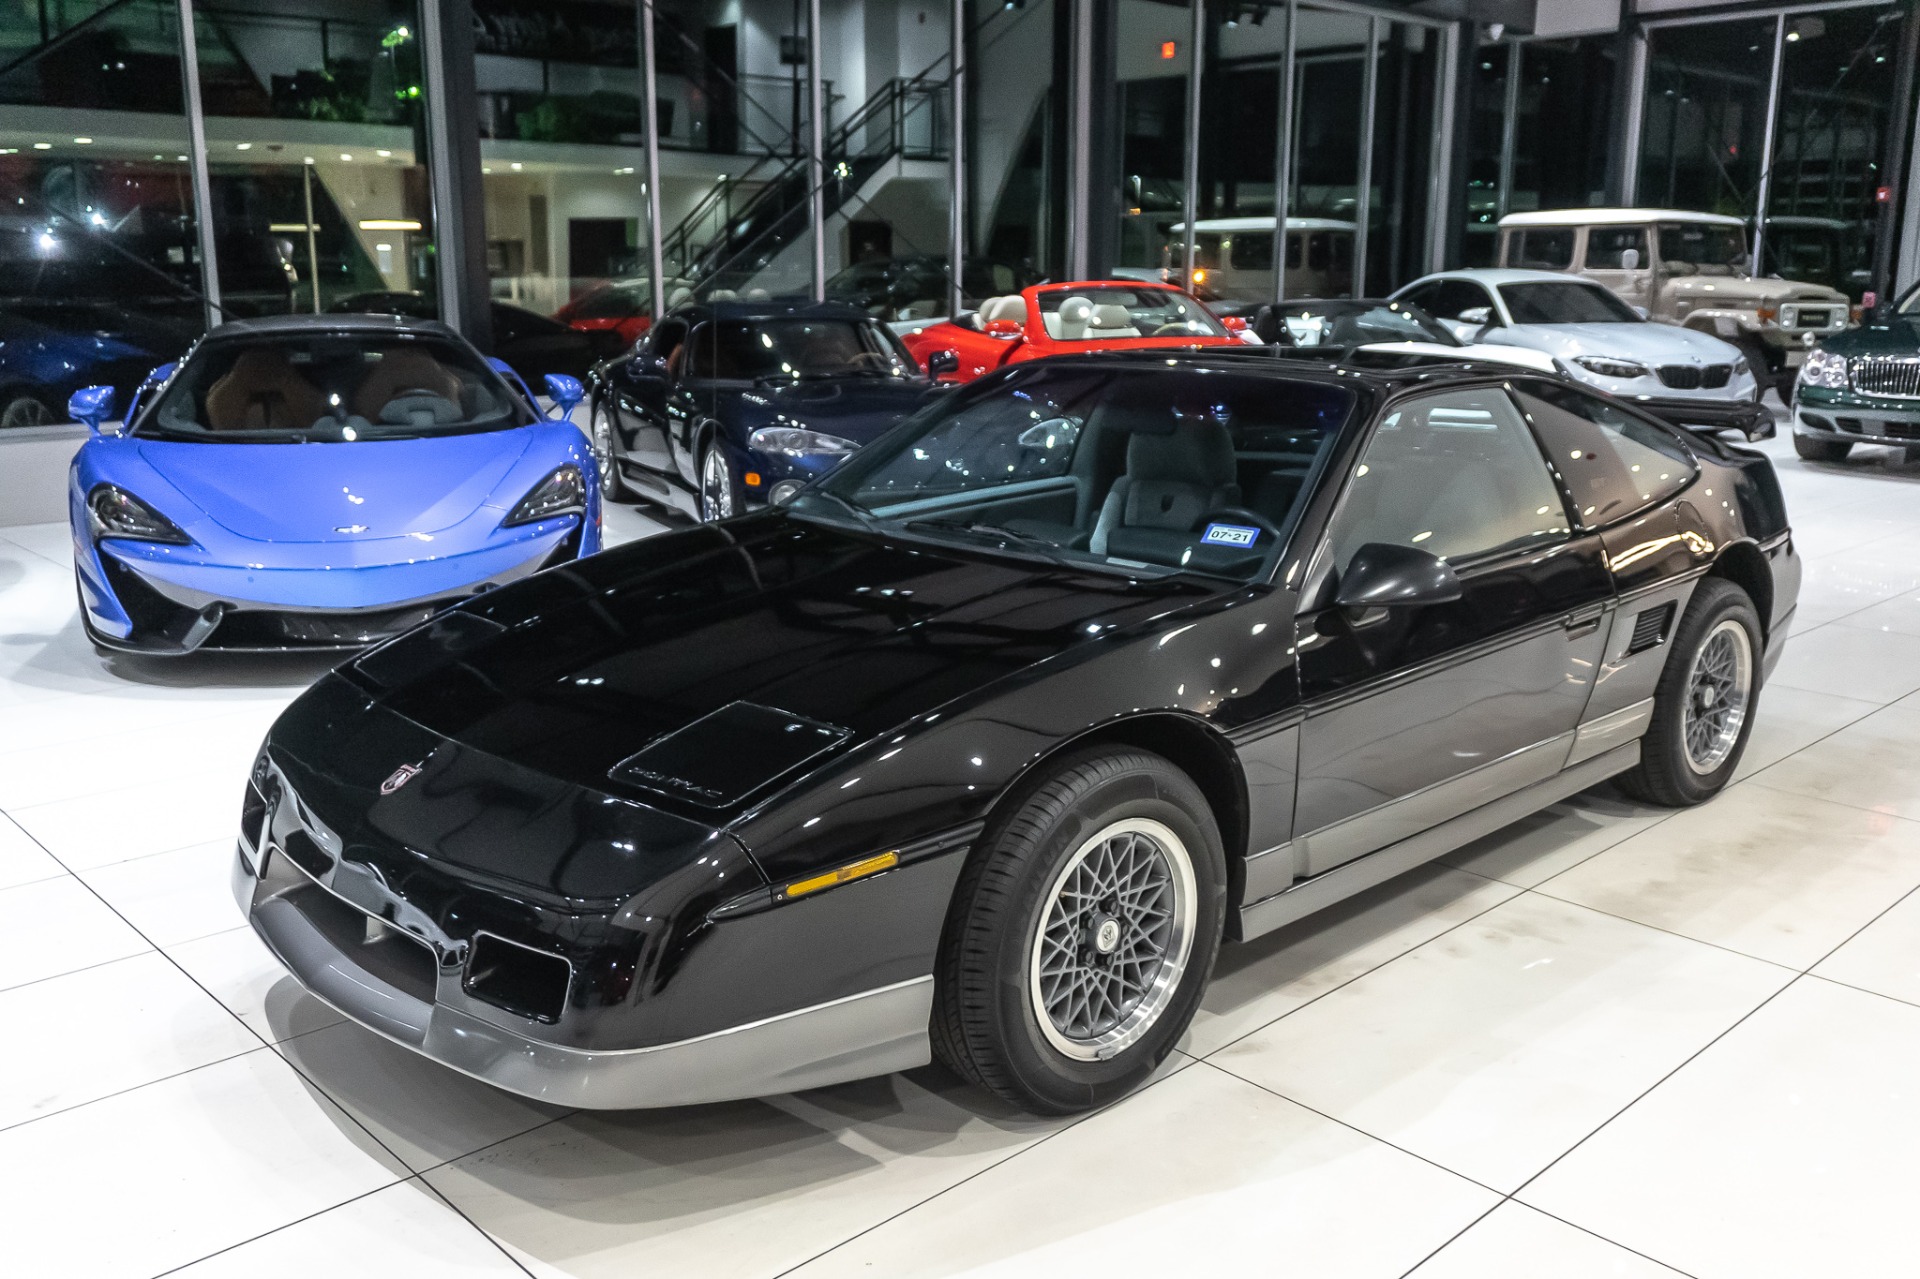 Used-1986-Pontiac-Fiero-GT-COUPE-MANUAL-TRANSMISSION-ONLY-39K-MILES